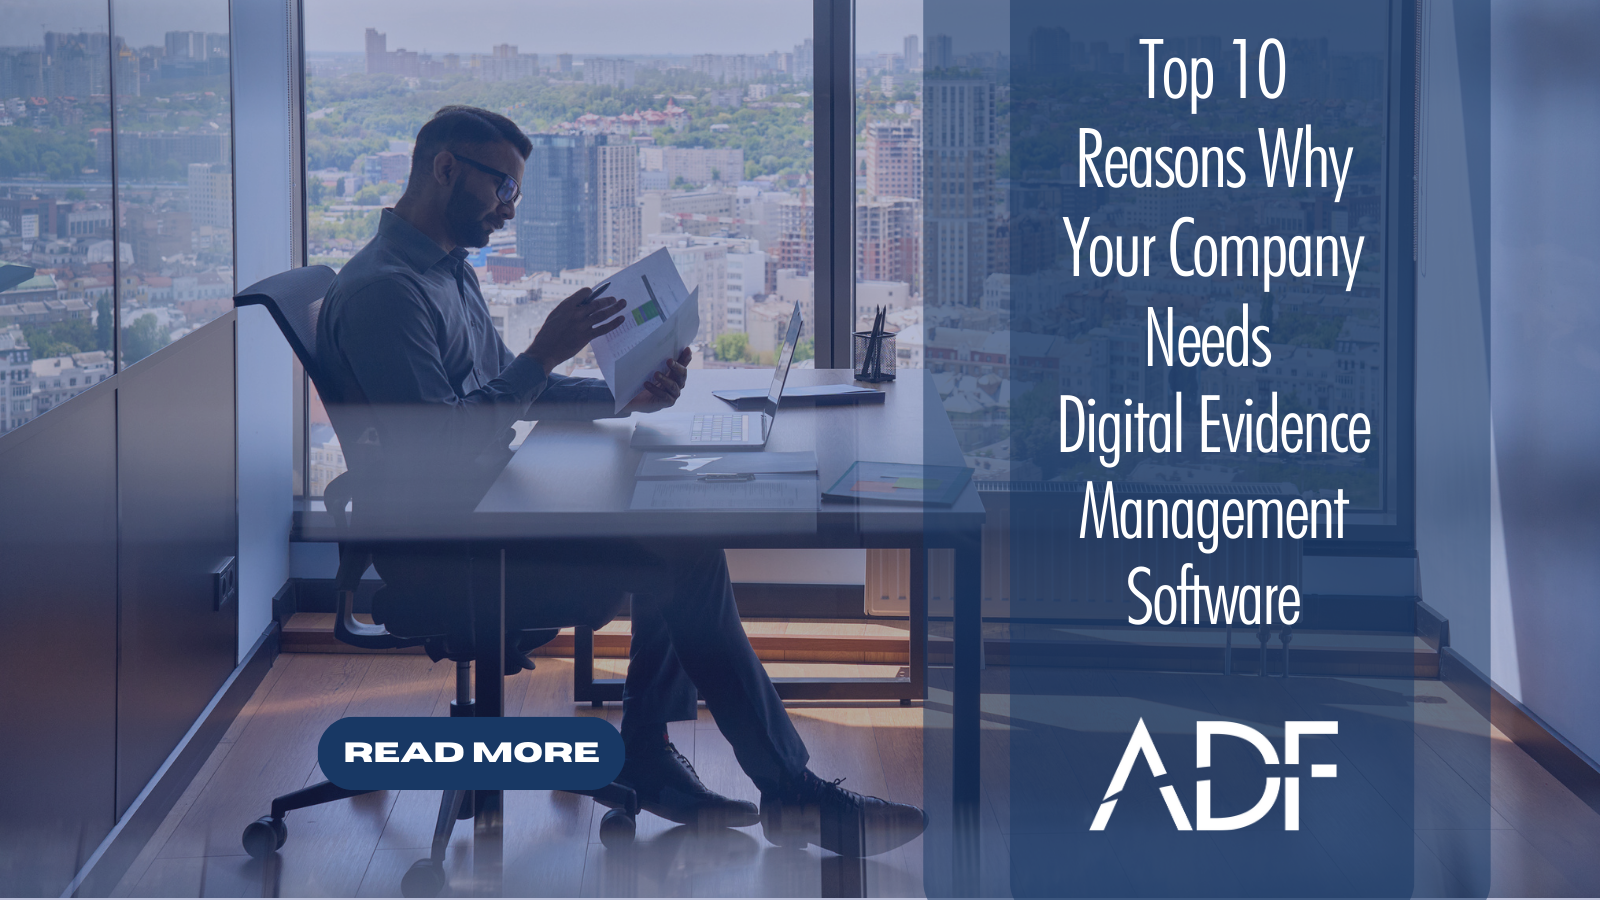 Top 10 Reasons Why Companies Need Digital Evidence Management Software